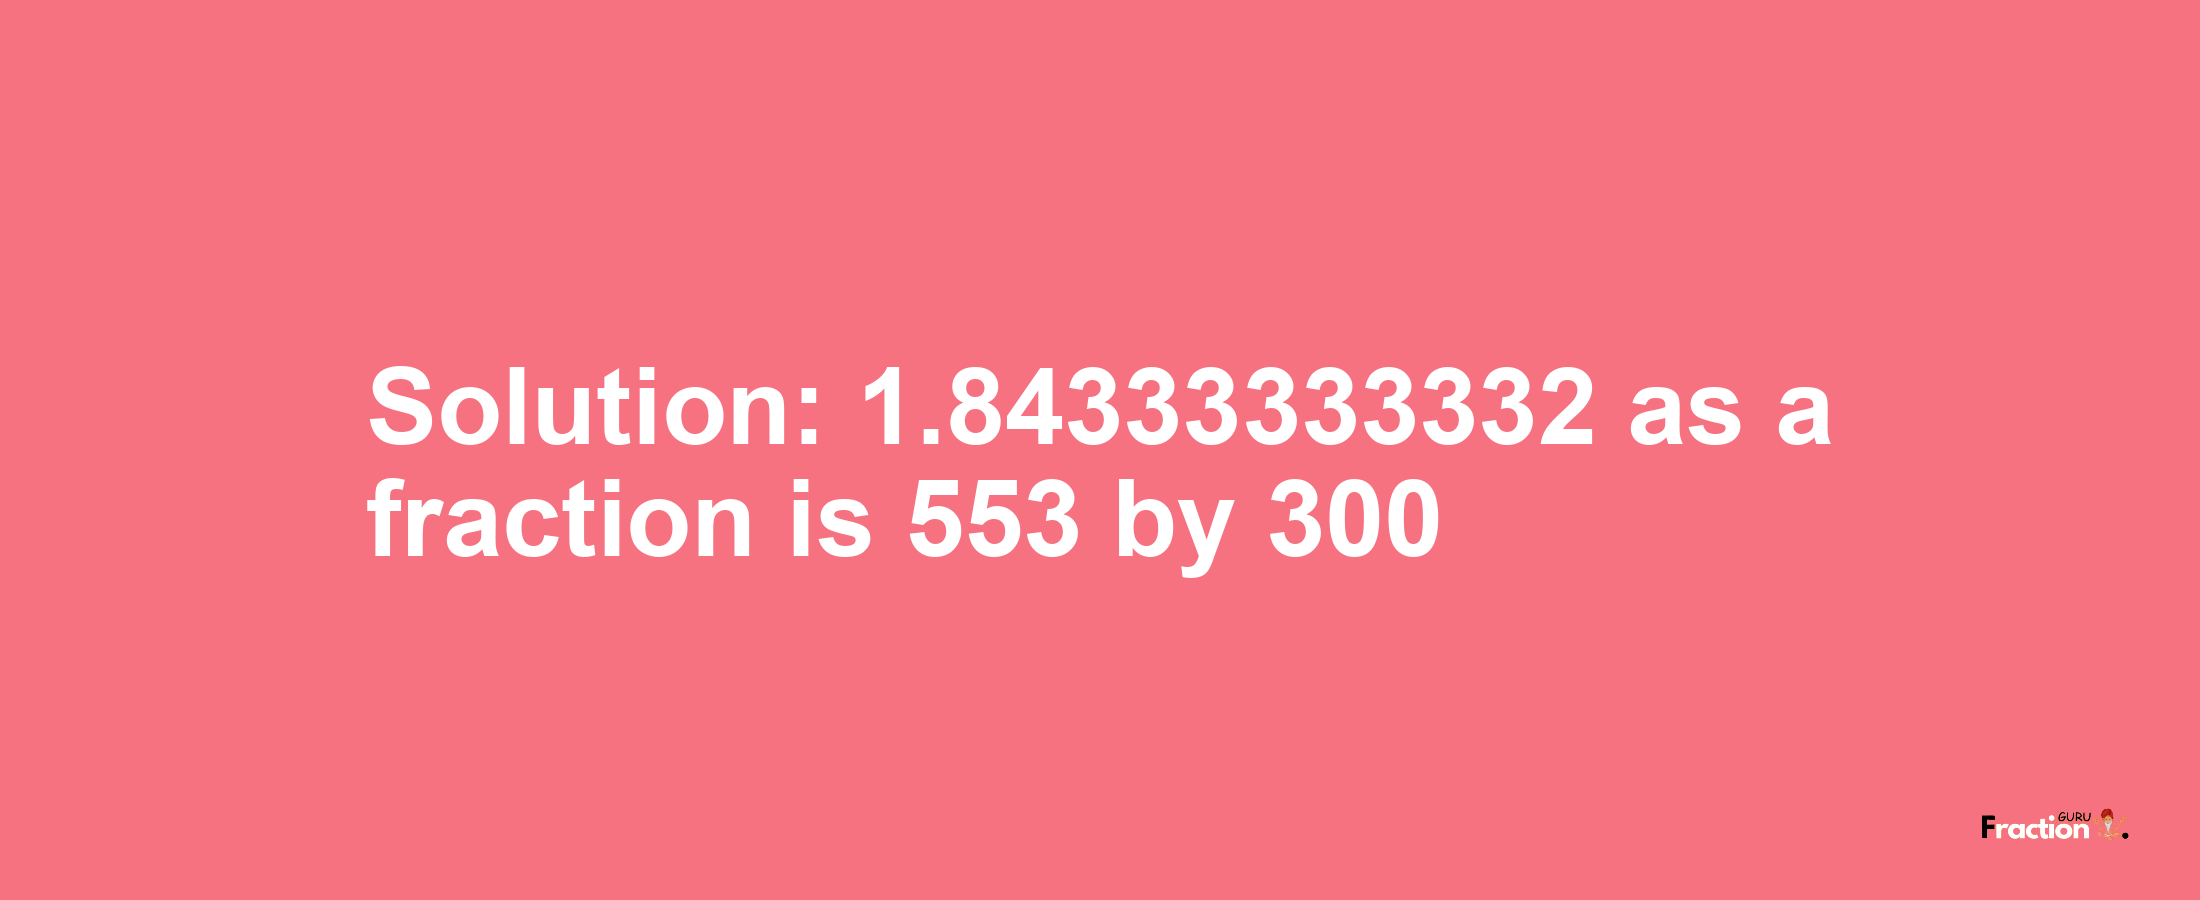 Solution:1.84333333332 as a fraction is 553/300